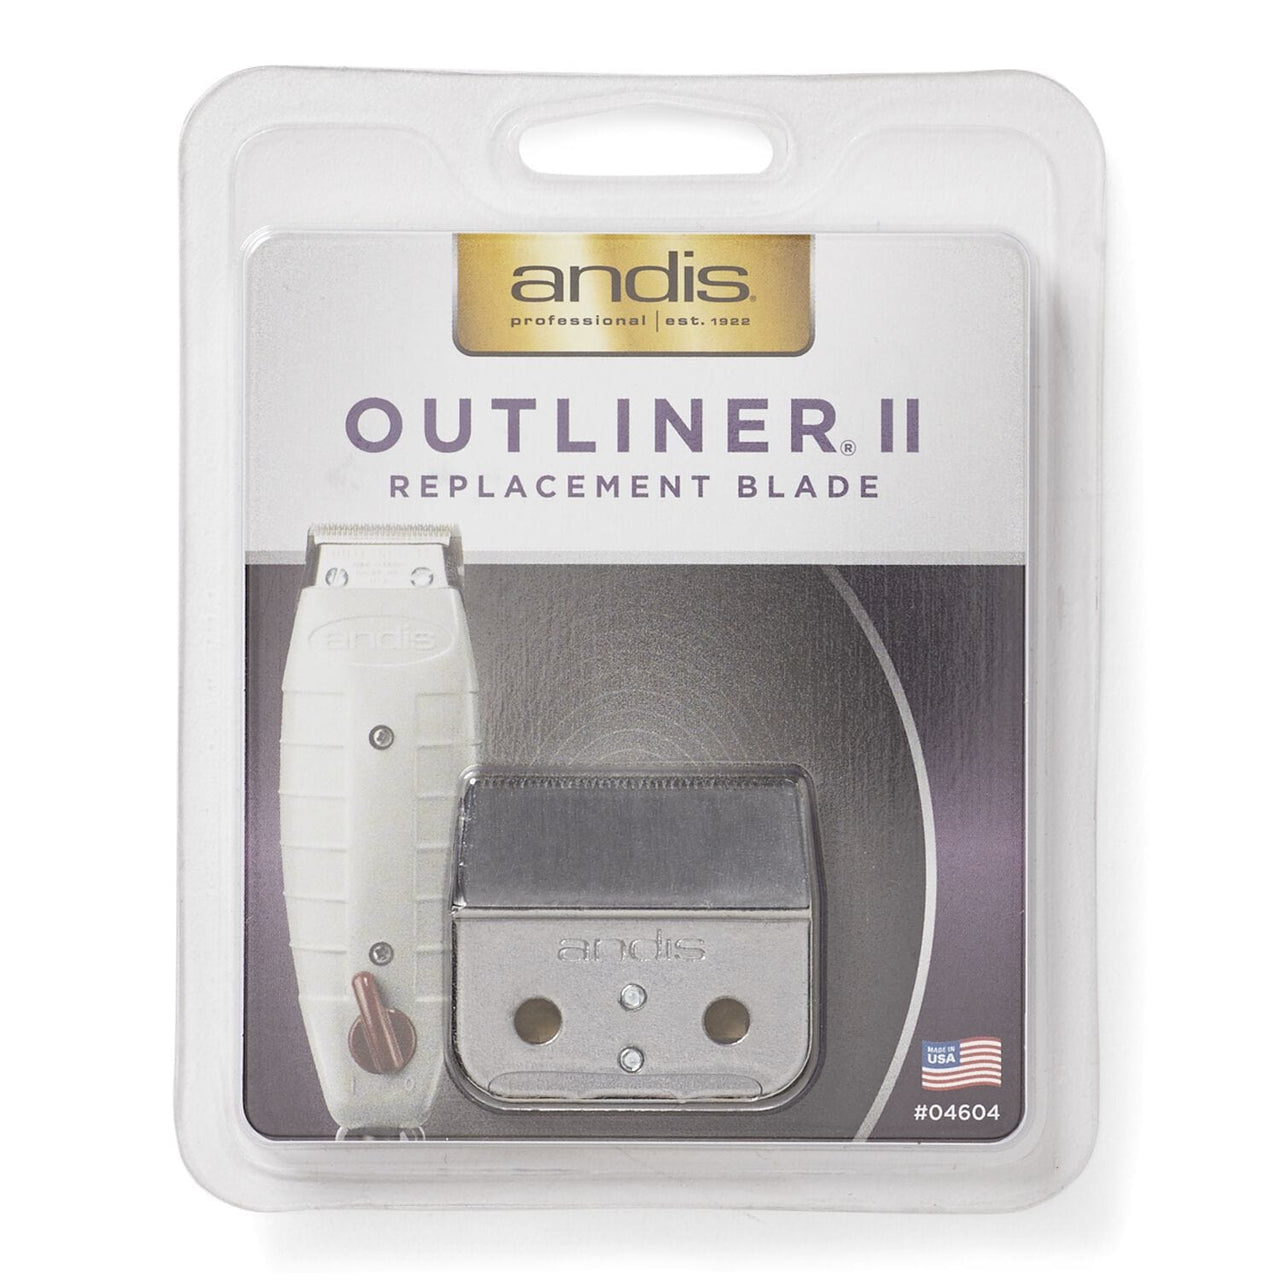 ANDIS_OUTLINER II replacement blade_Cosmetic World